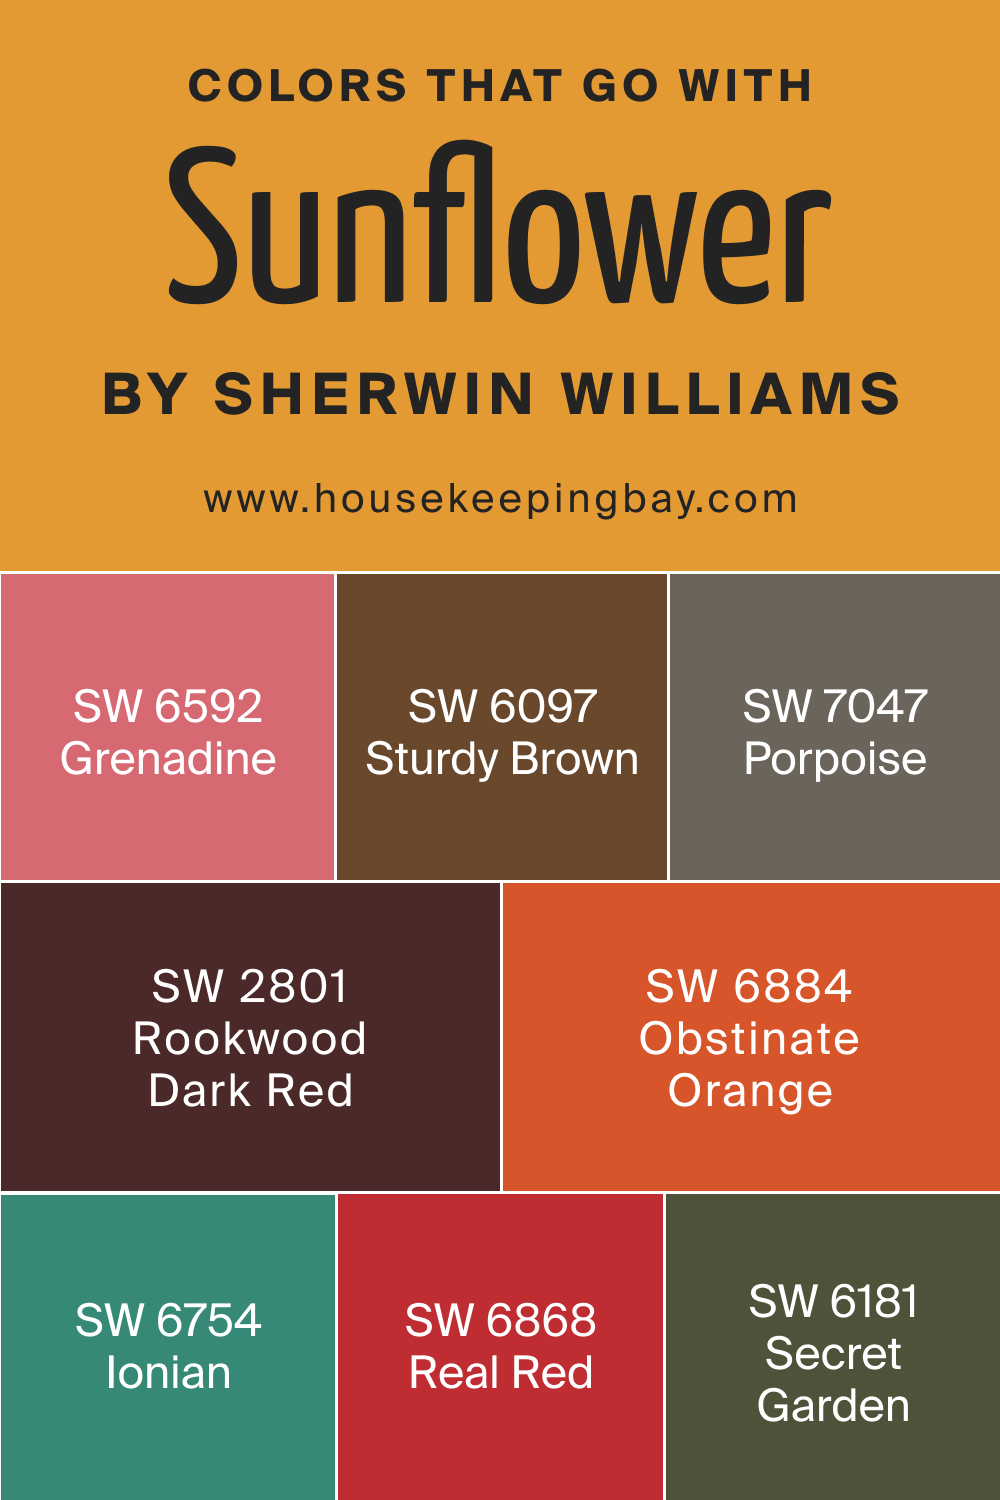 Colors that go with Sunflower SW 6678 by Sherwin Williams